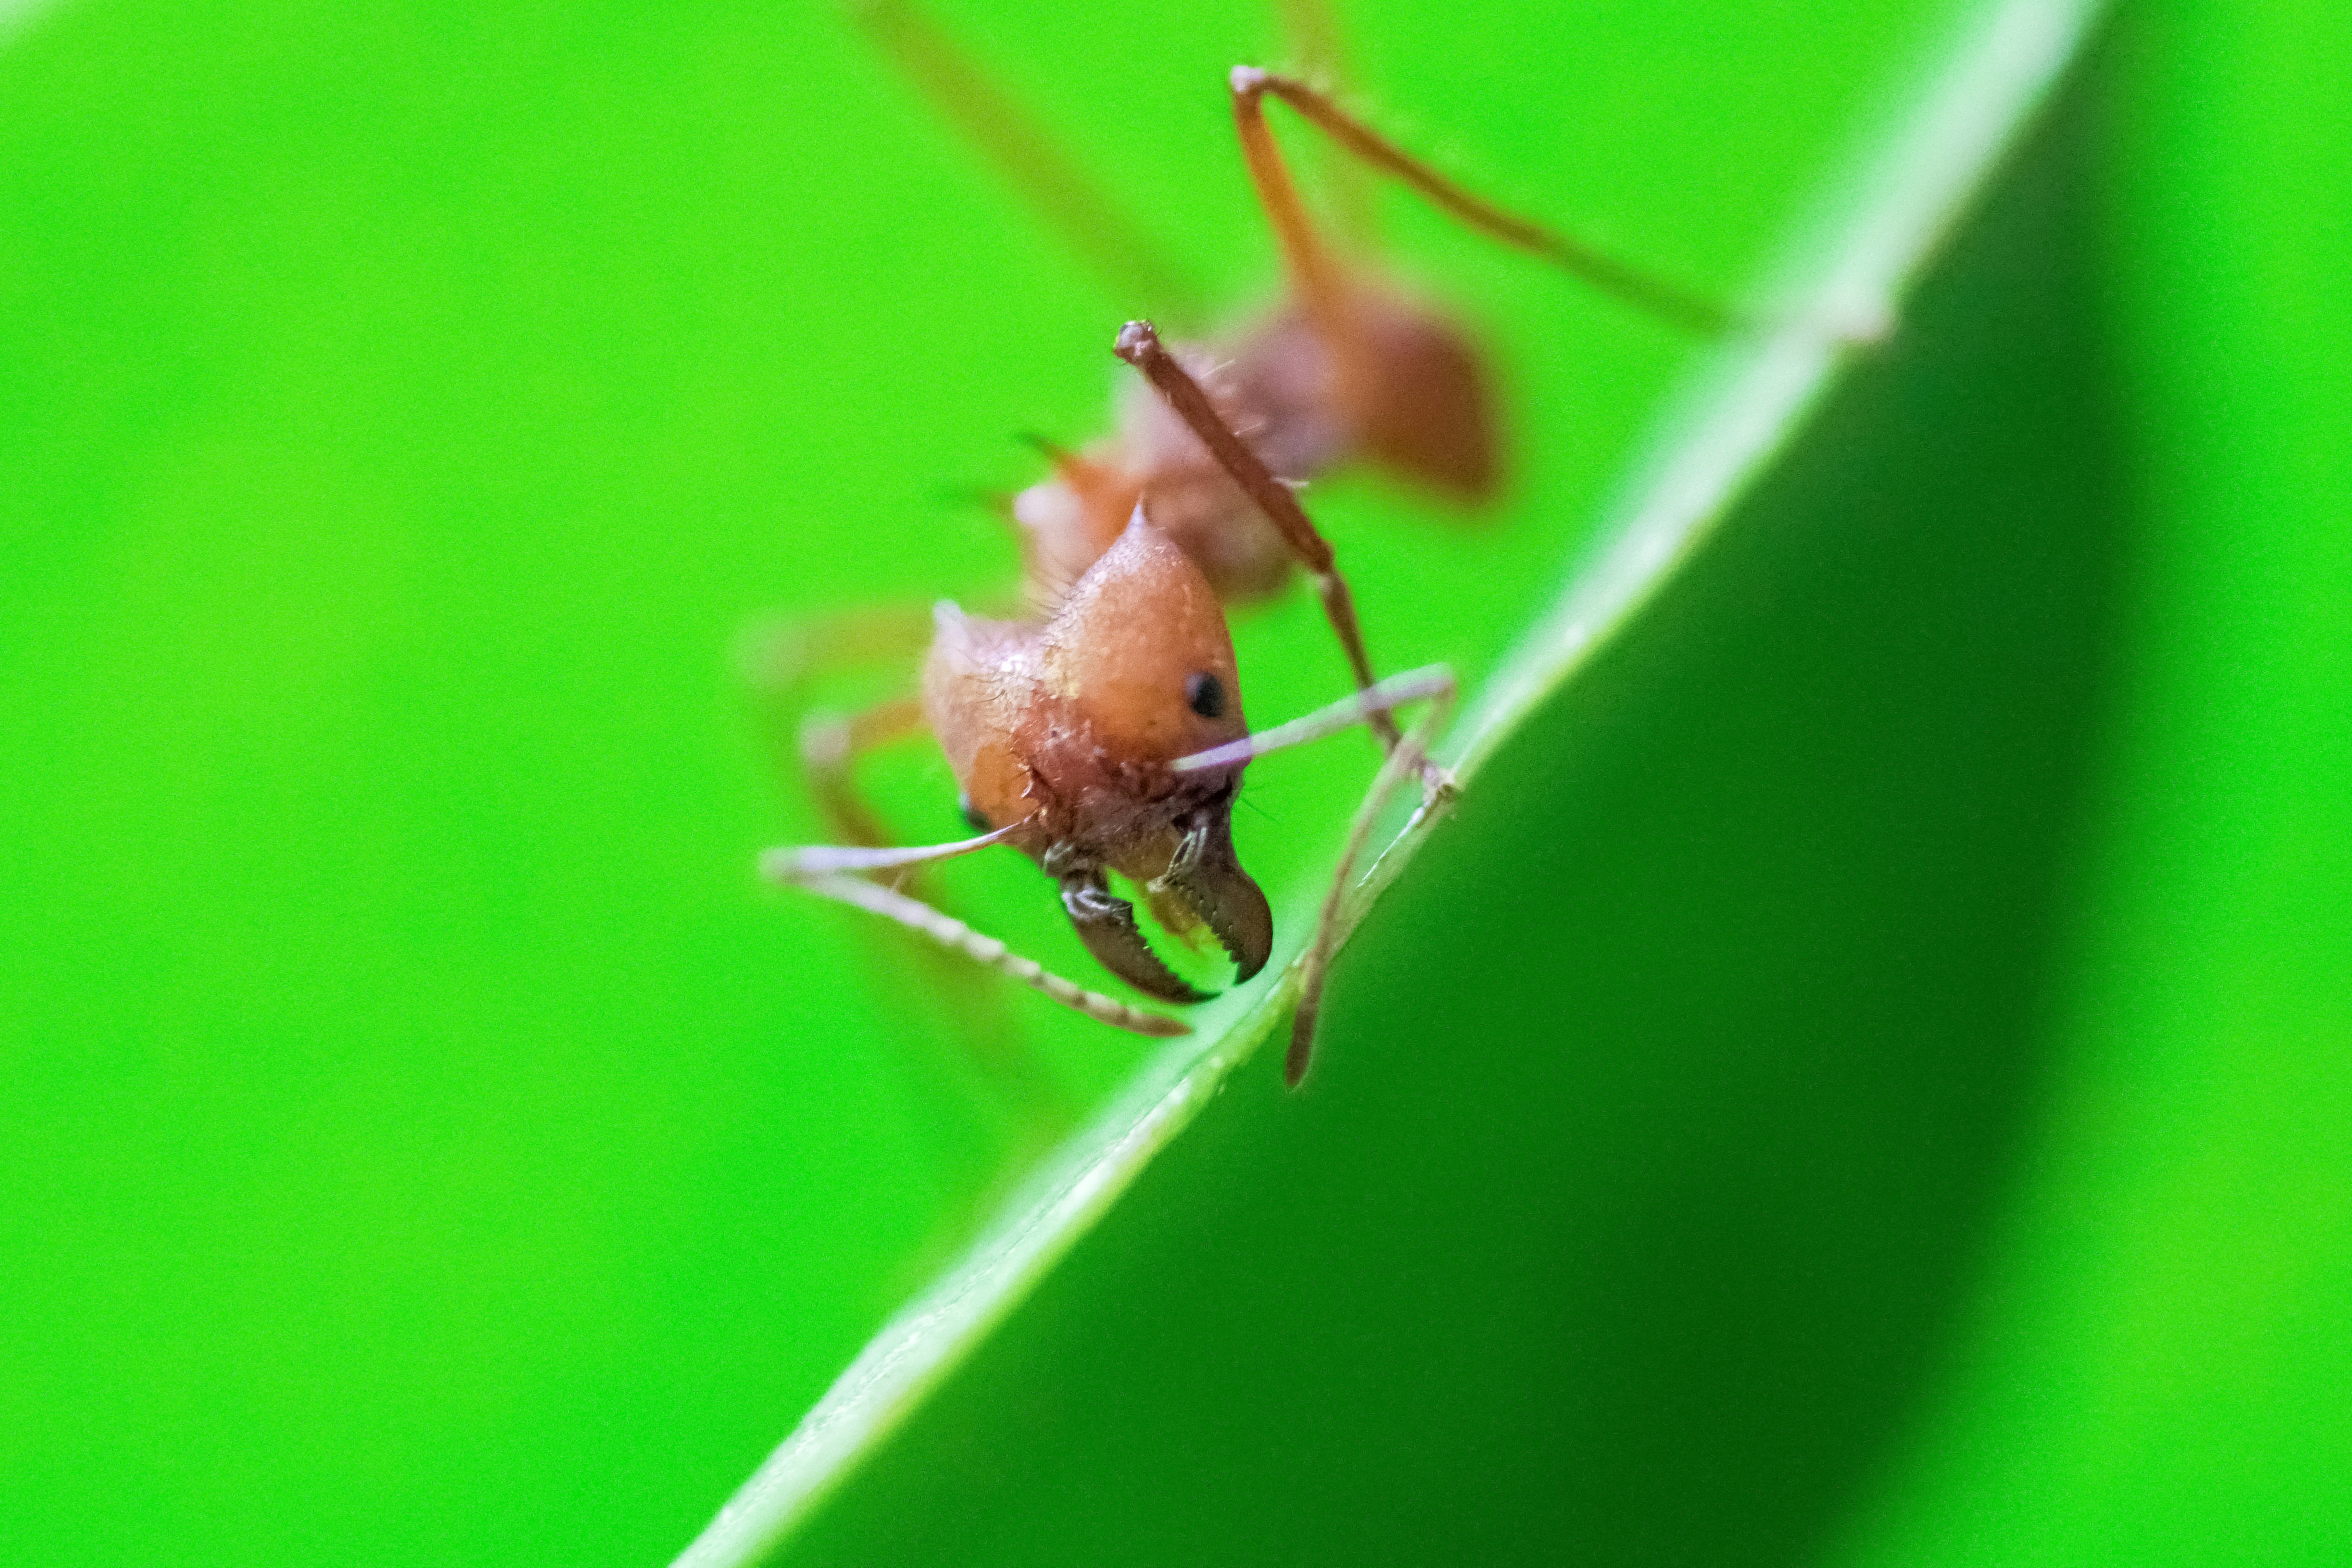 brown ant on green surface